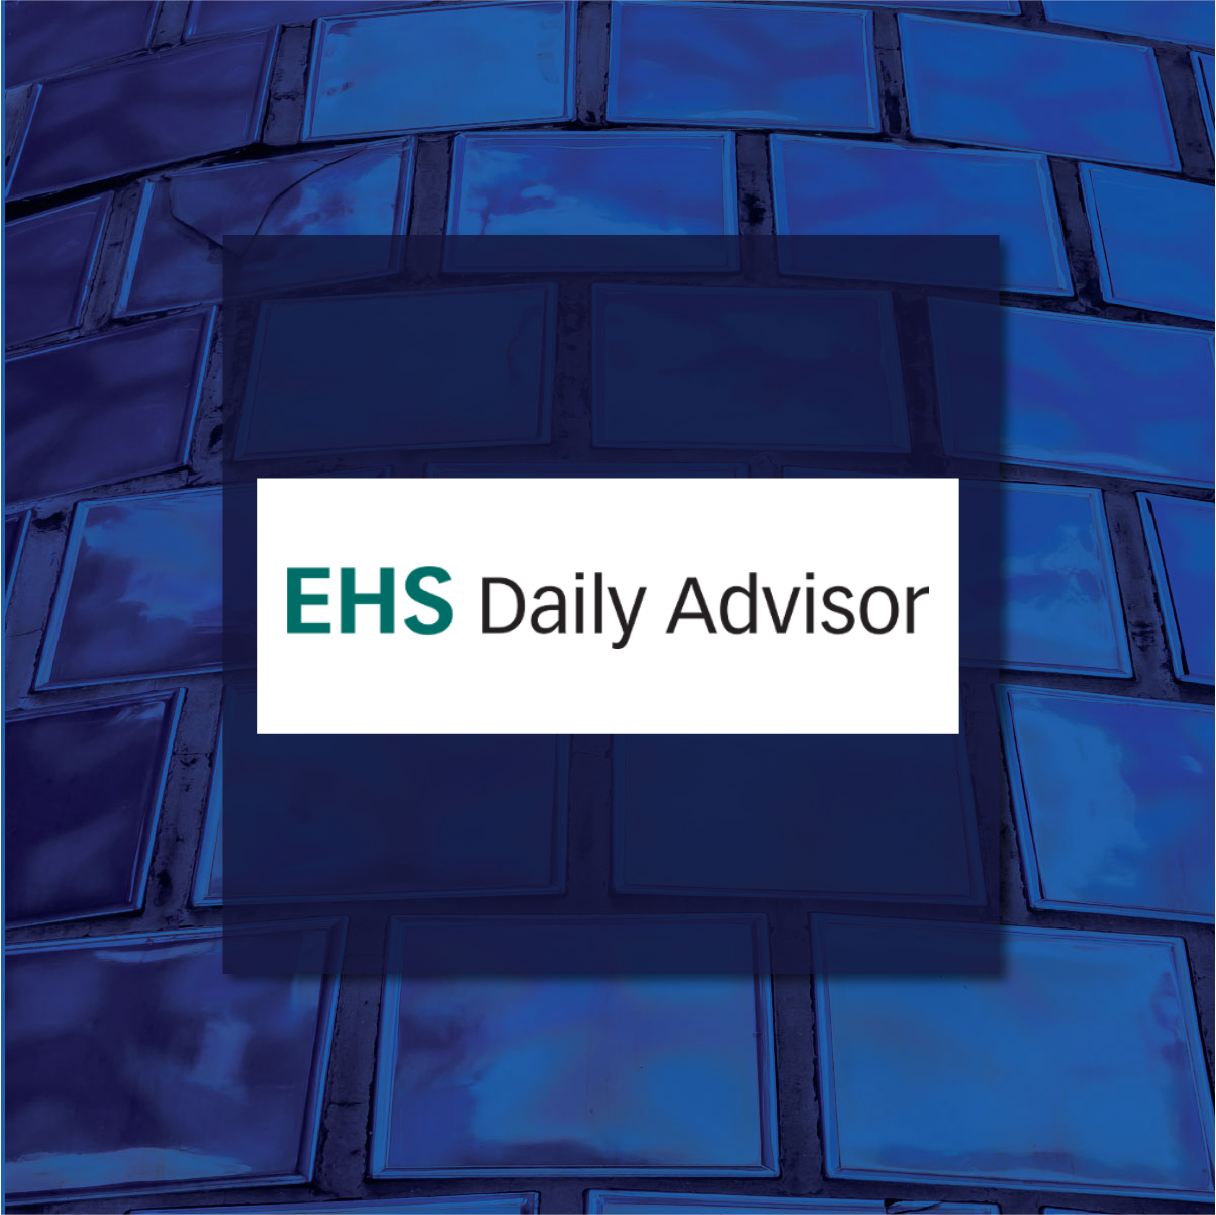 KPA was recently featured by EHS Daily Advisor